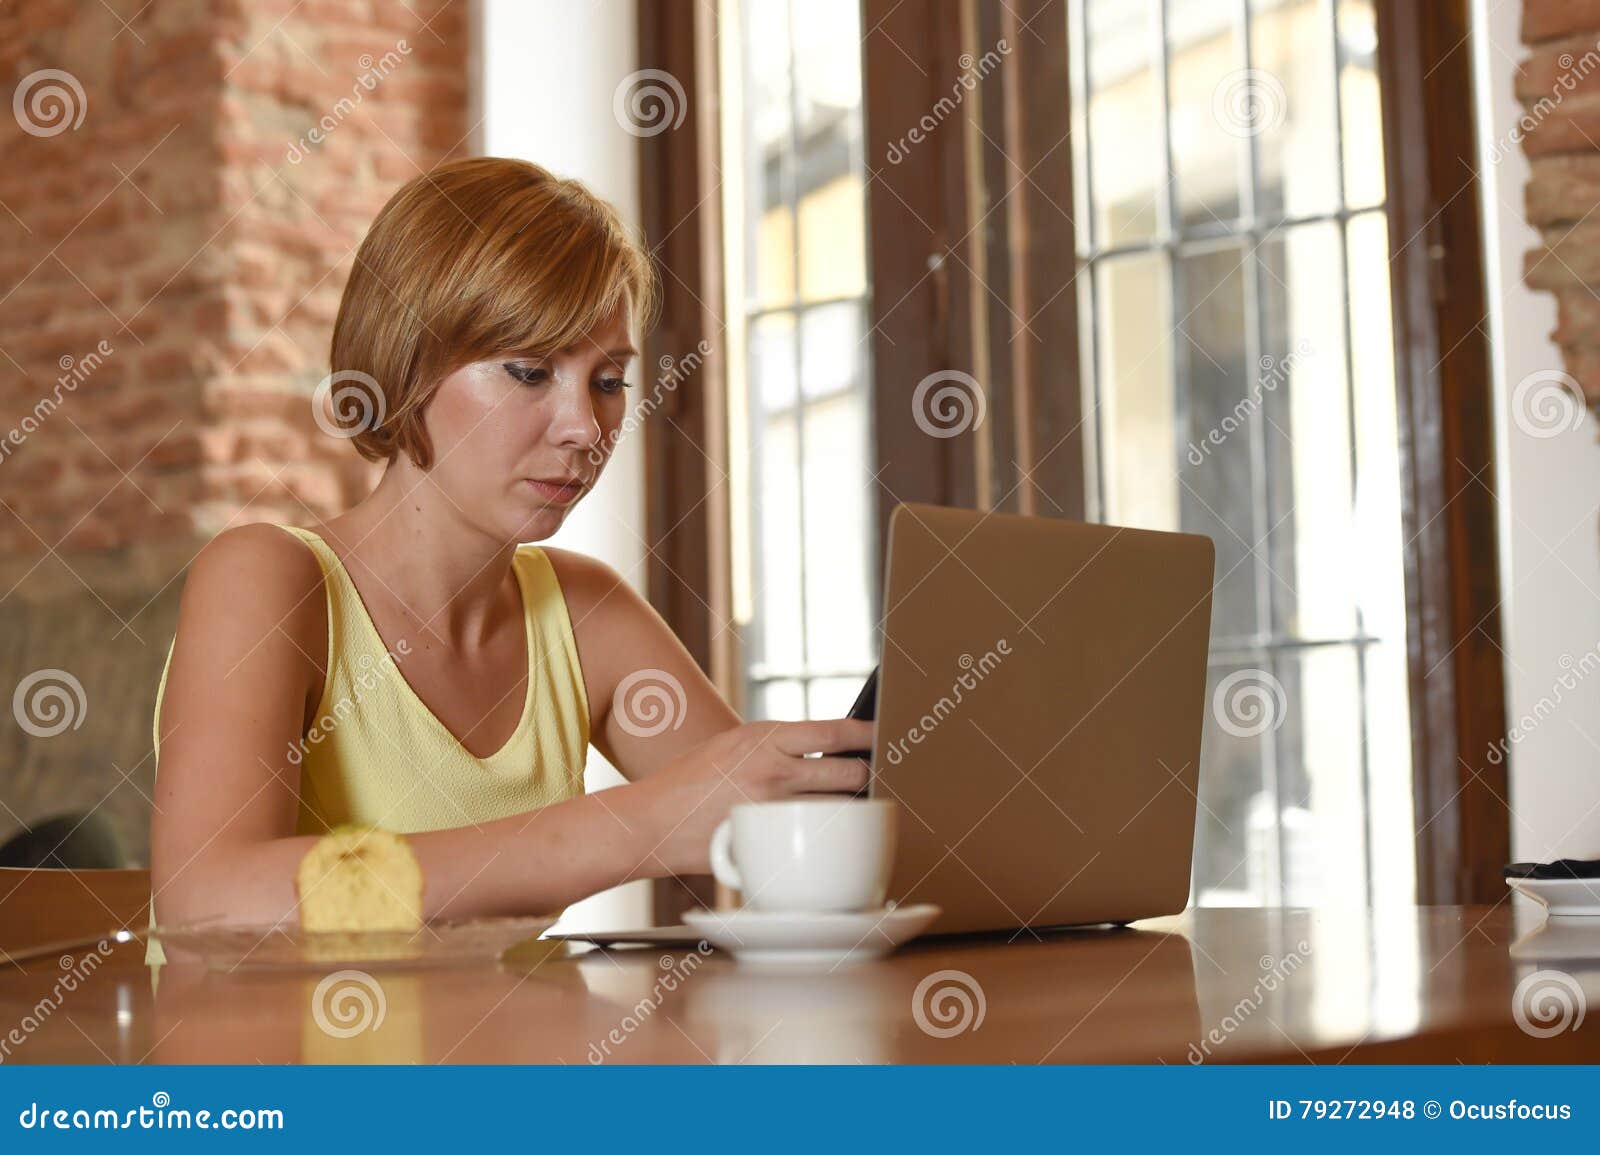 woman working busy at coffee shop with laptop computer using mobile phone